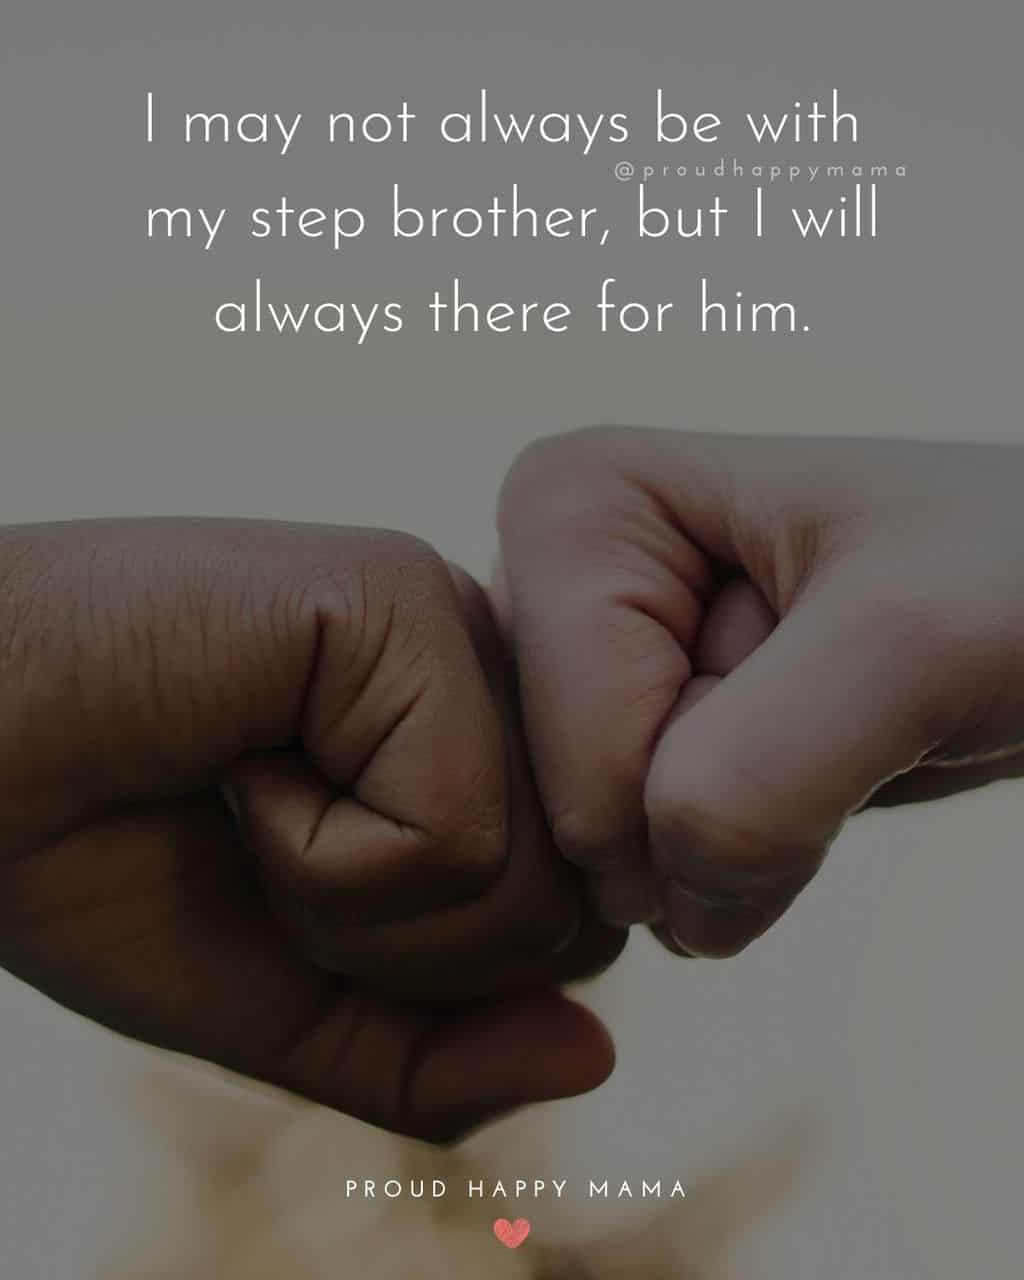 Step Brother Quotes - I may not always be with my step brother, but I will always there for him.’